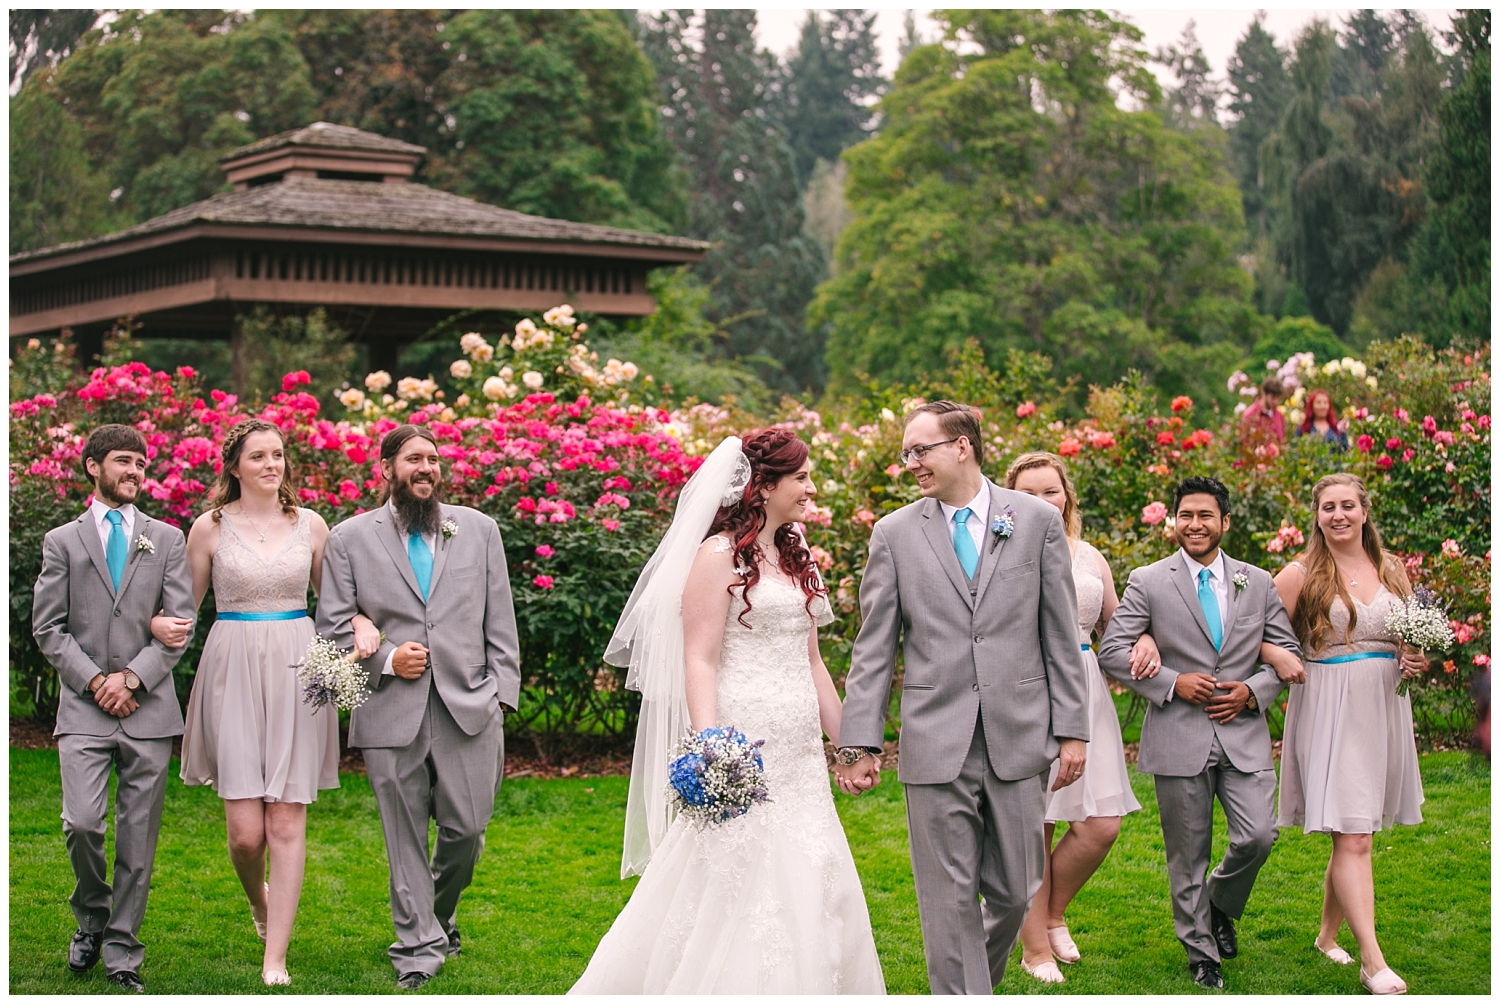 Bridal Party Portraits at Point Defiance Park Rose Garden in Tacoma, WA